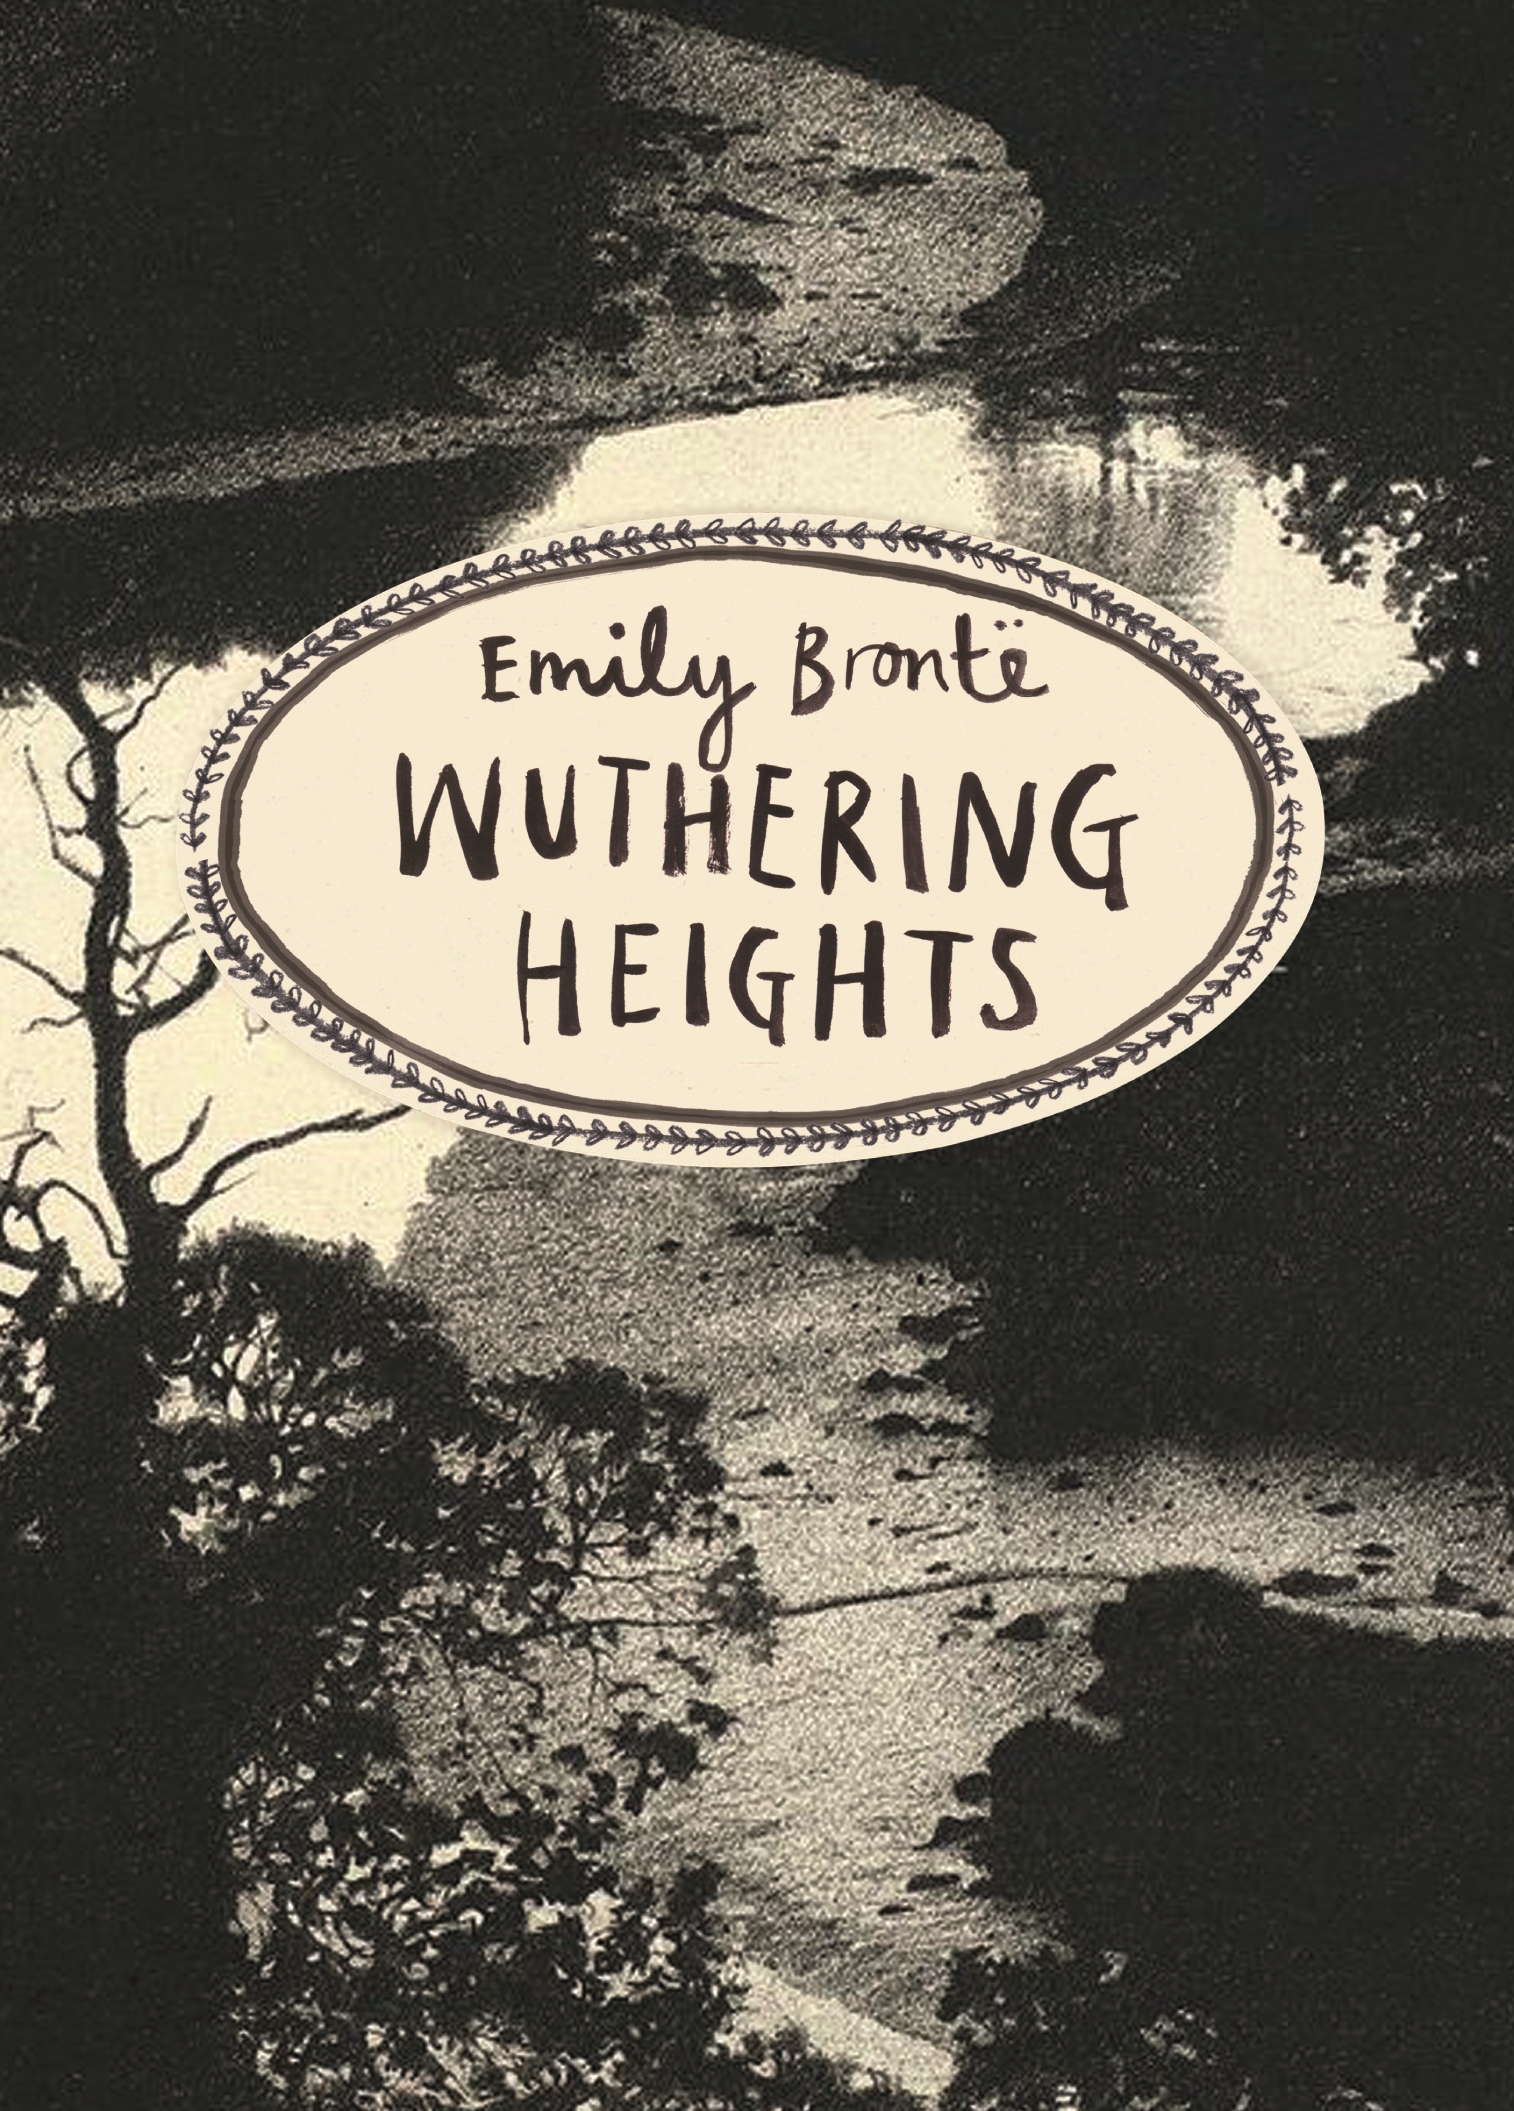 Wuthering Heights (Vintage Classics Bronte Series) by Emily Brontë -  Penguin Books Australia